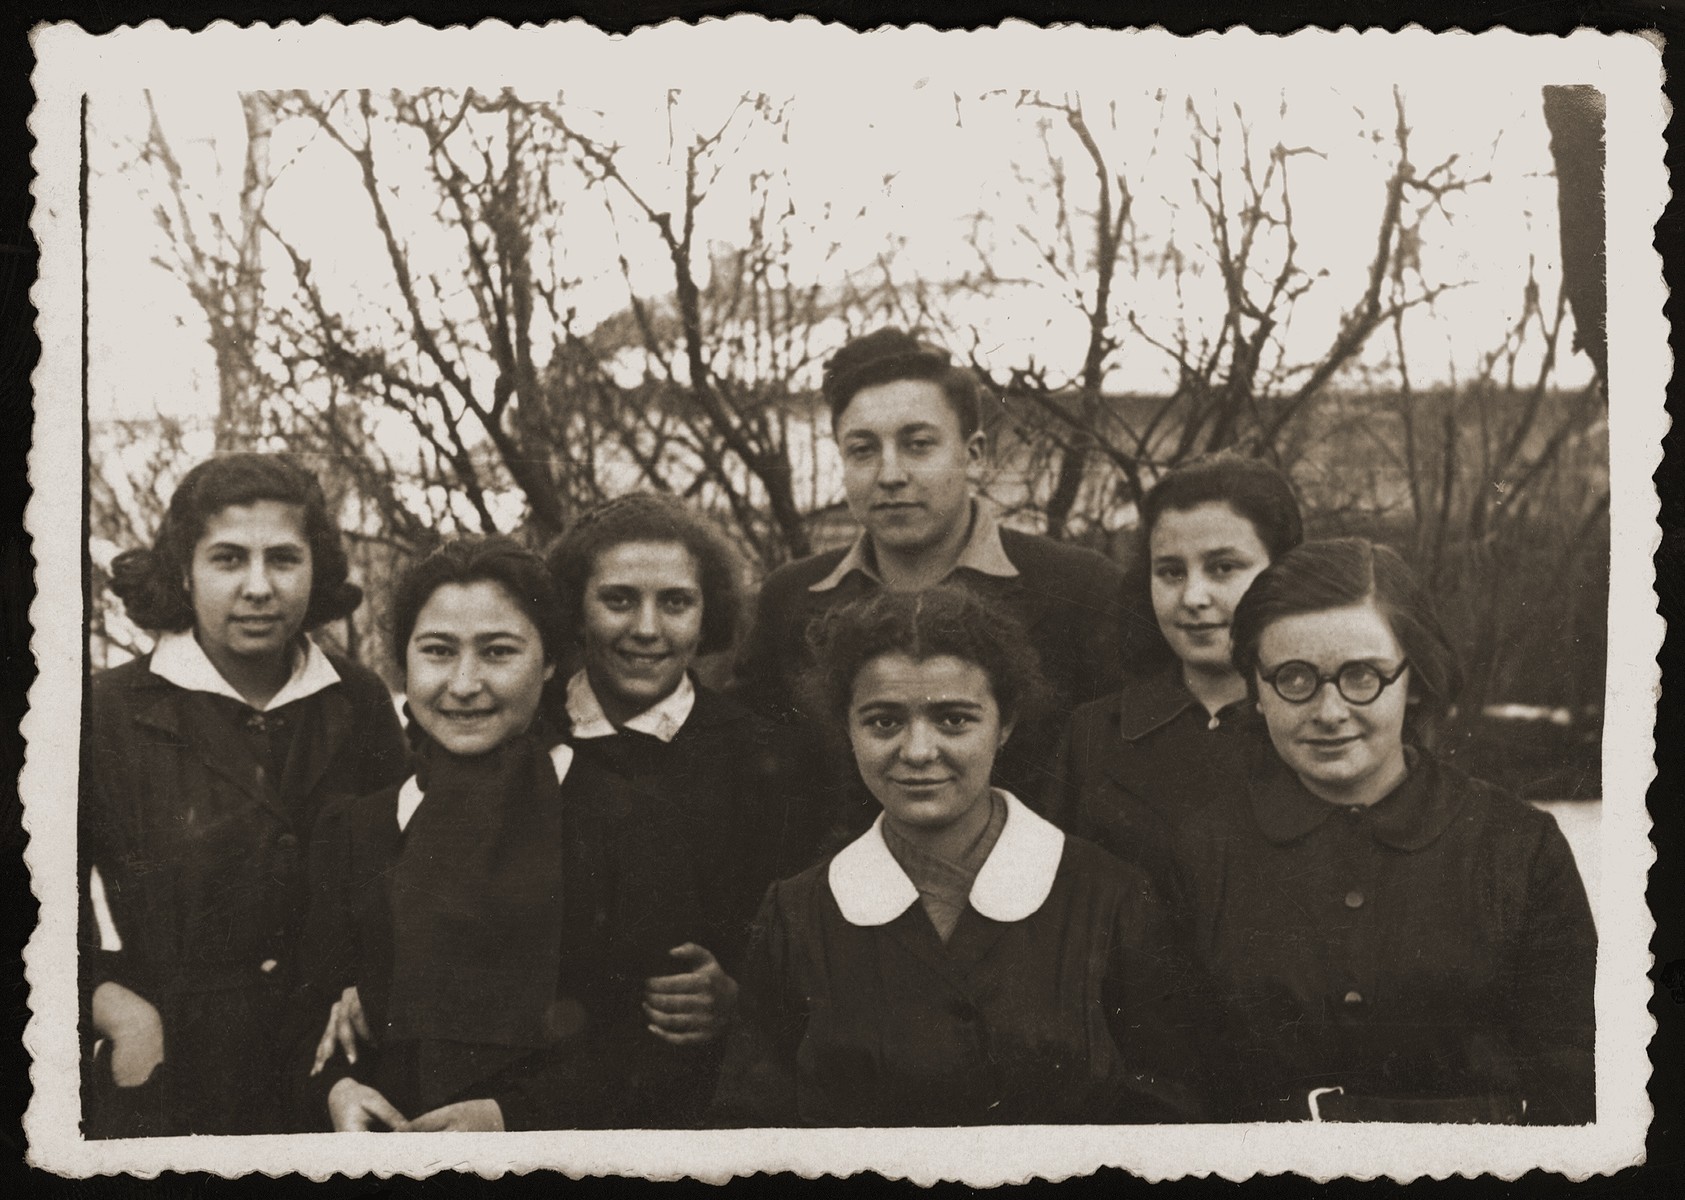 Group portrait of members of an Hashomer Hatzair Zionist youth group in Bialystok.  

Among those pictured are Malka Orkin (center, front) and her friend Tusia Goldberg (third from the left).  Tusia, whose father later became a member of the Bialystok ghetto Jewish council, survived the war.